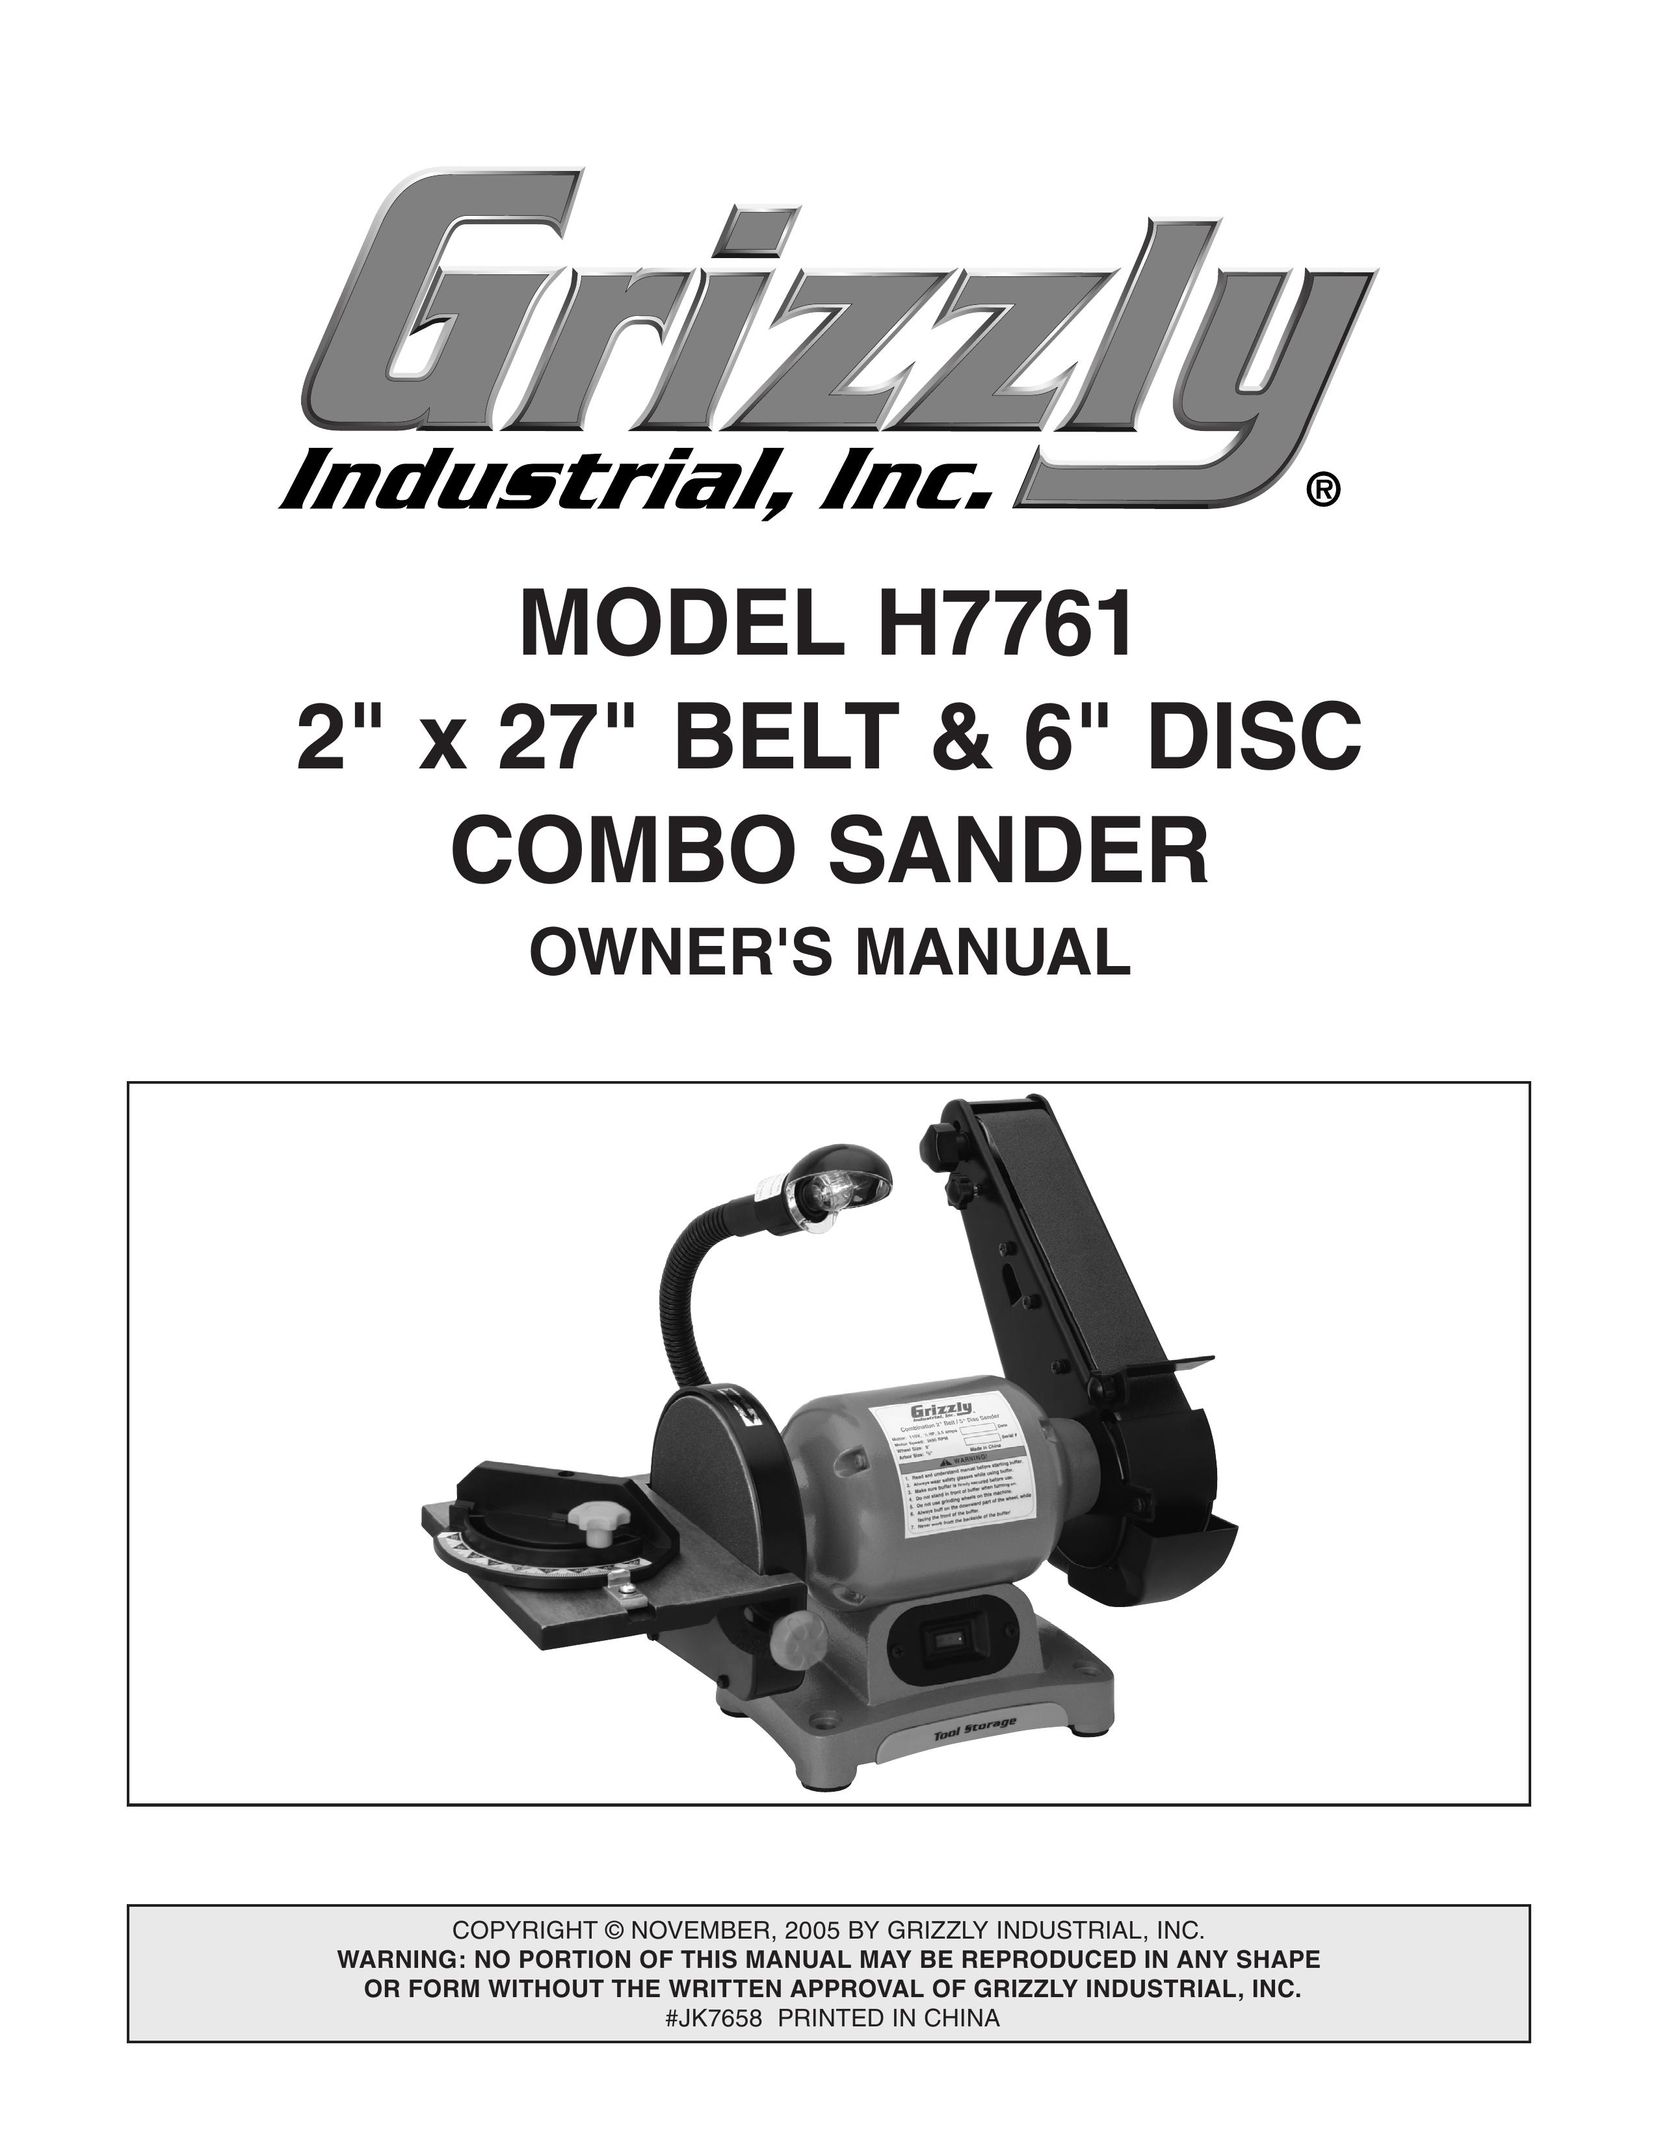 Grizzly H7761 Grinder User Manual